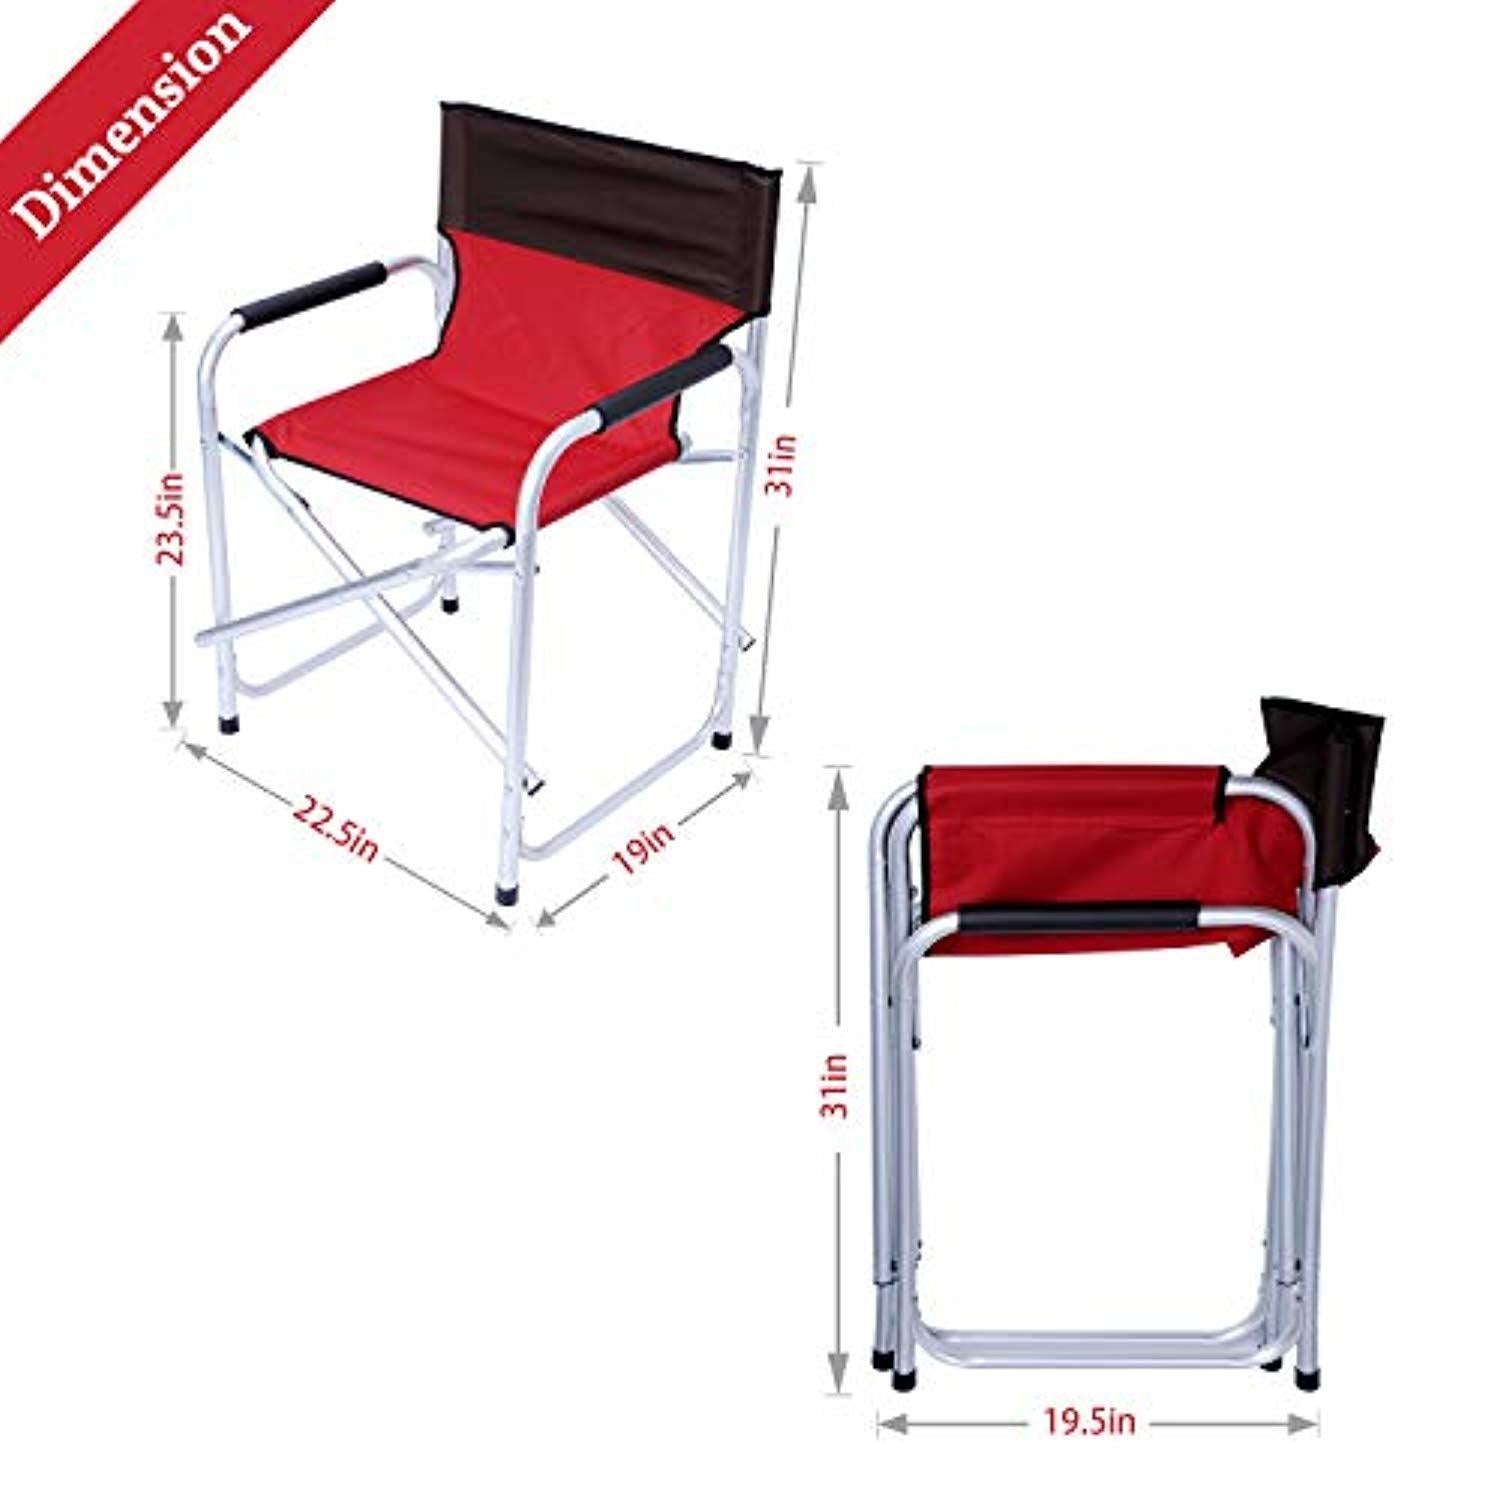 Bosonshop Folding Director's Chair Portable Aluminum Camping Chairs with Armrest for Outdoor Activity